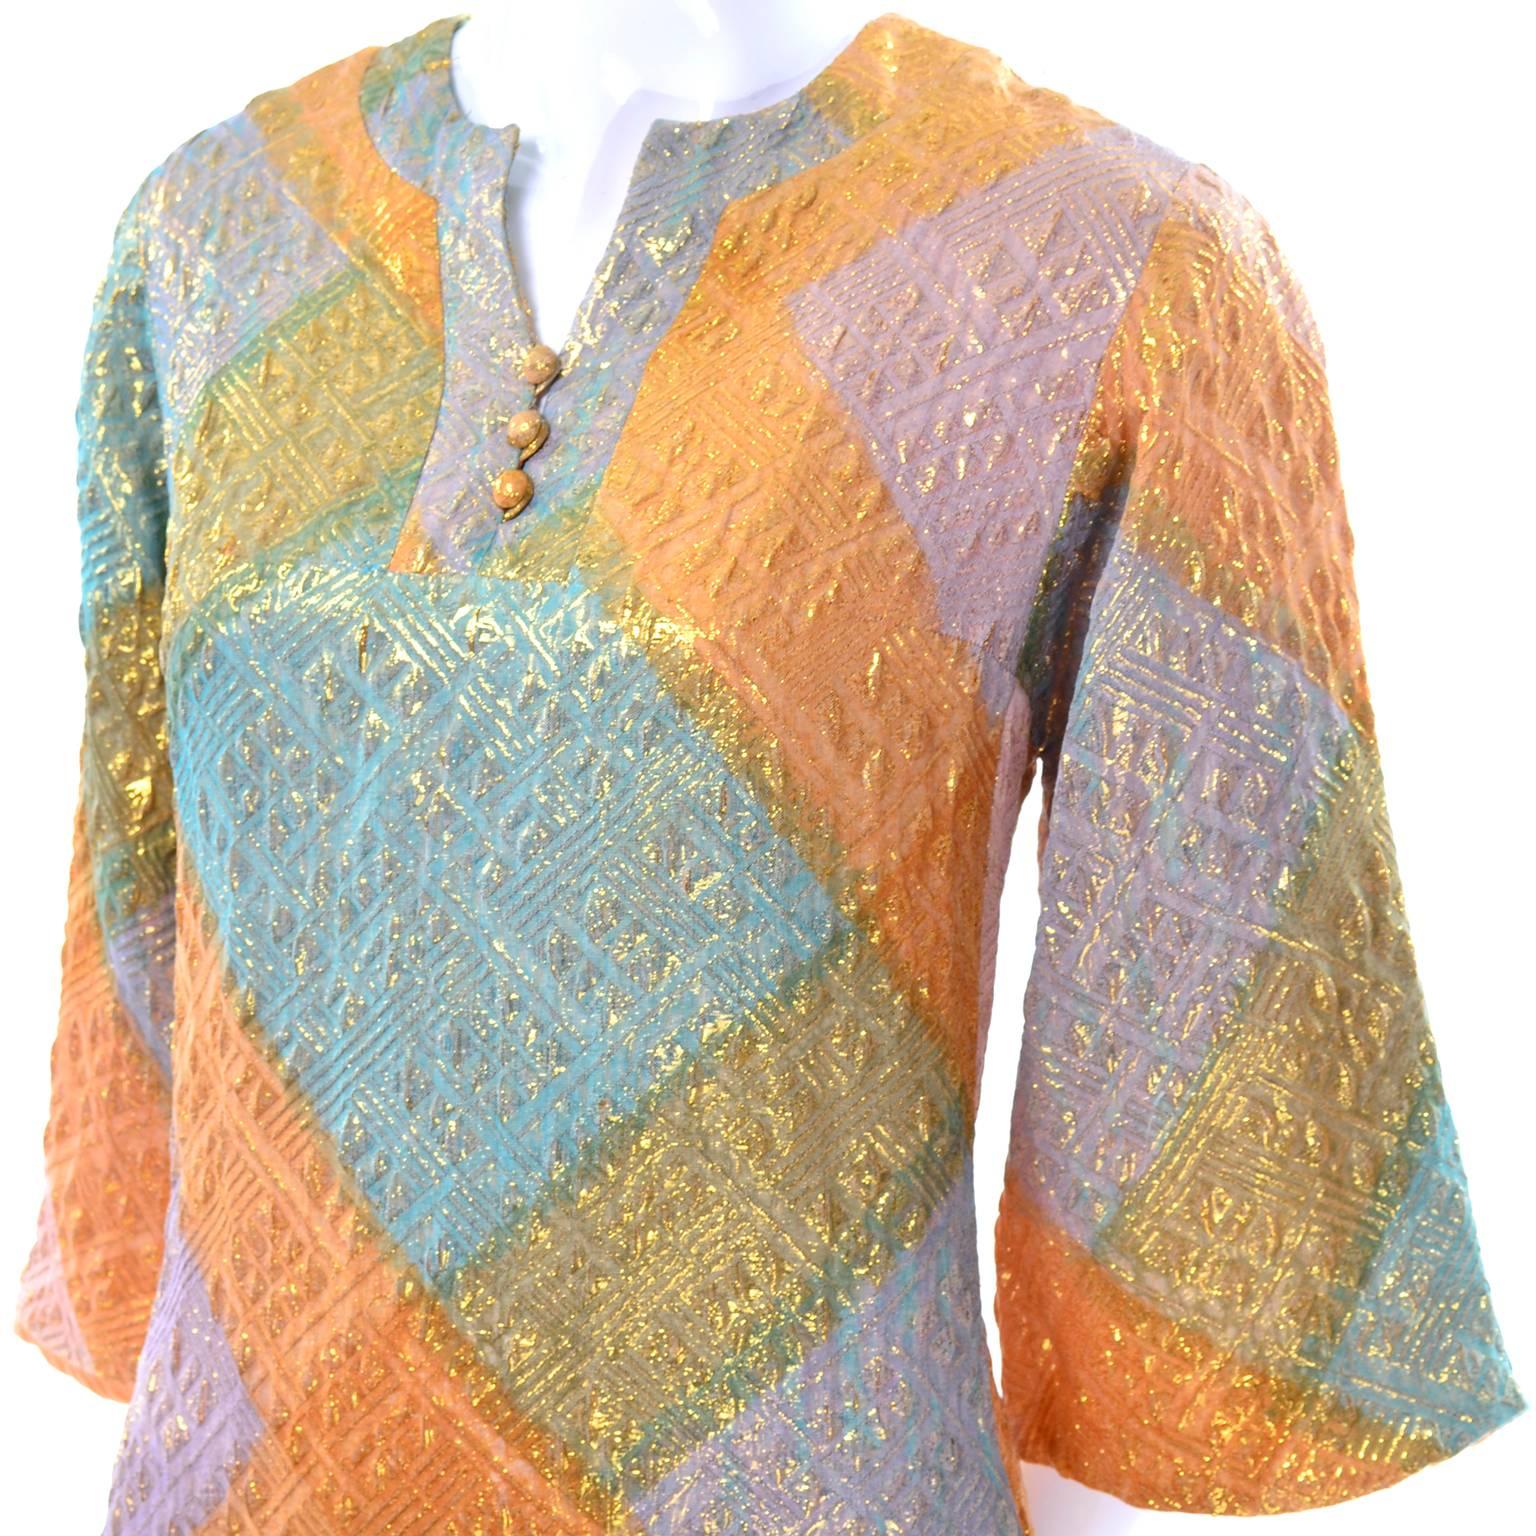 We love this pretty Dynasty long dress in metallic shades of blue, orange, purple, pink and gold!  The caftan style dress is fully lined and has 14